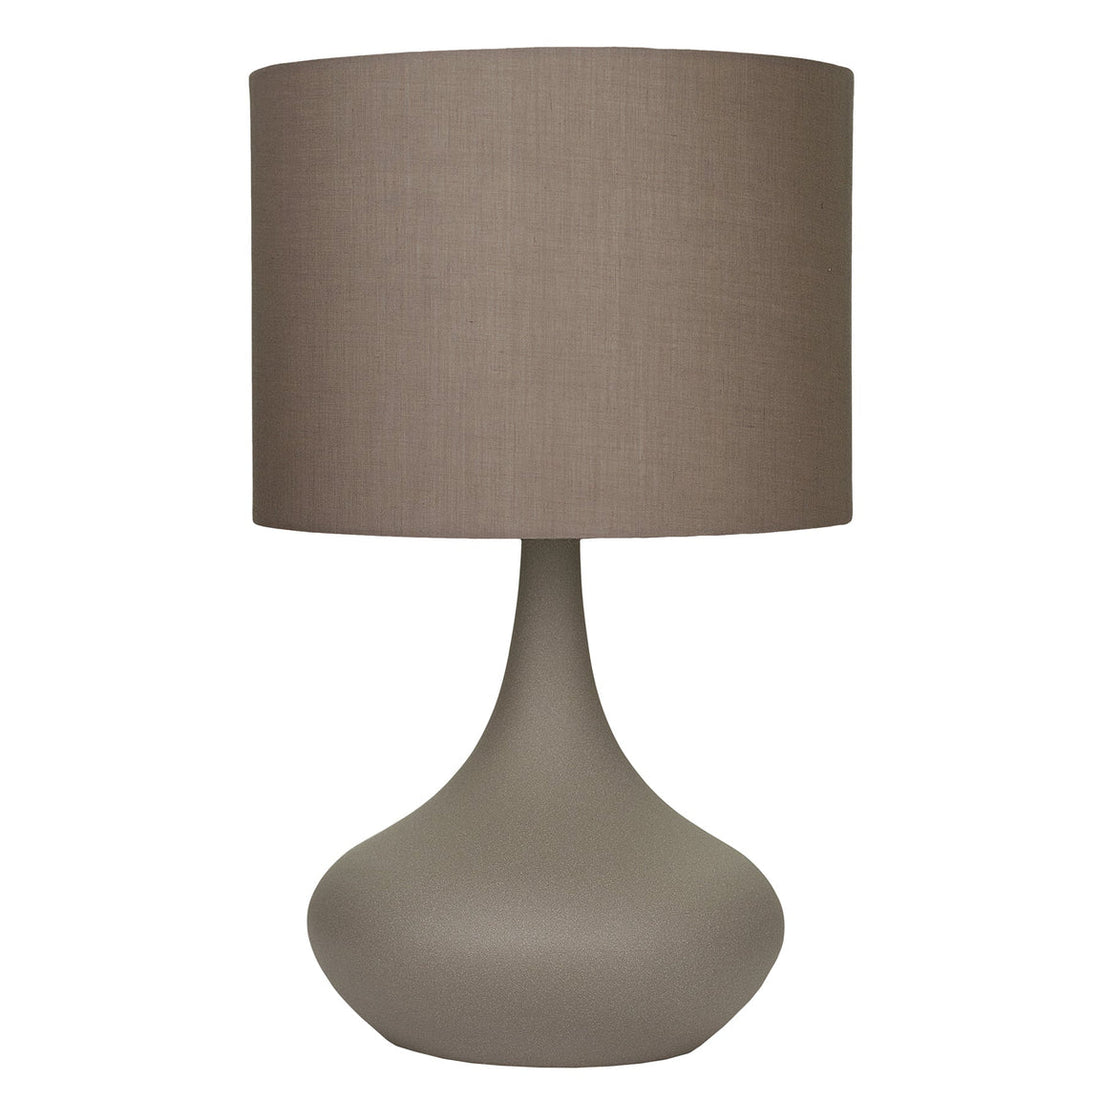 Atley Large Concrete-Look Modern Touch Lamp